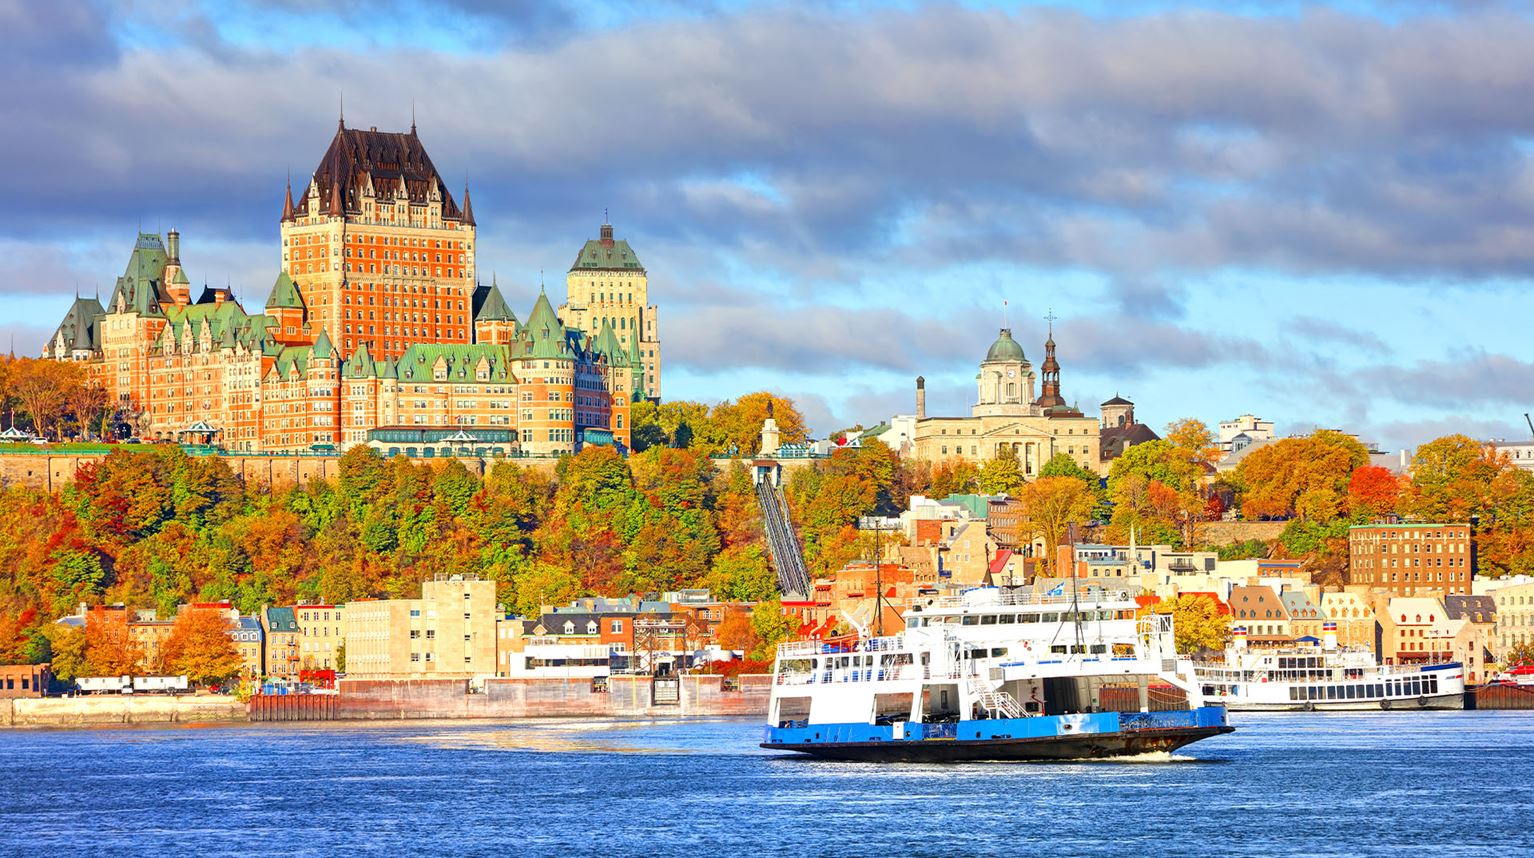 View of Quebec City, including a large brick hotel 